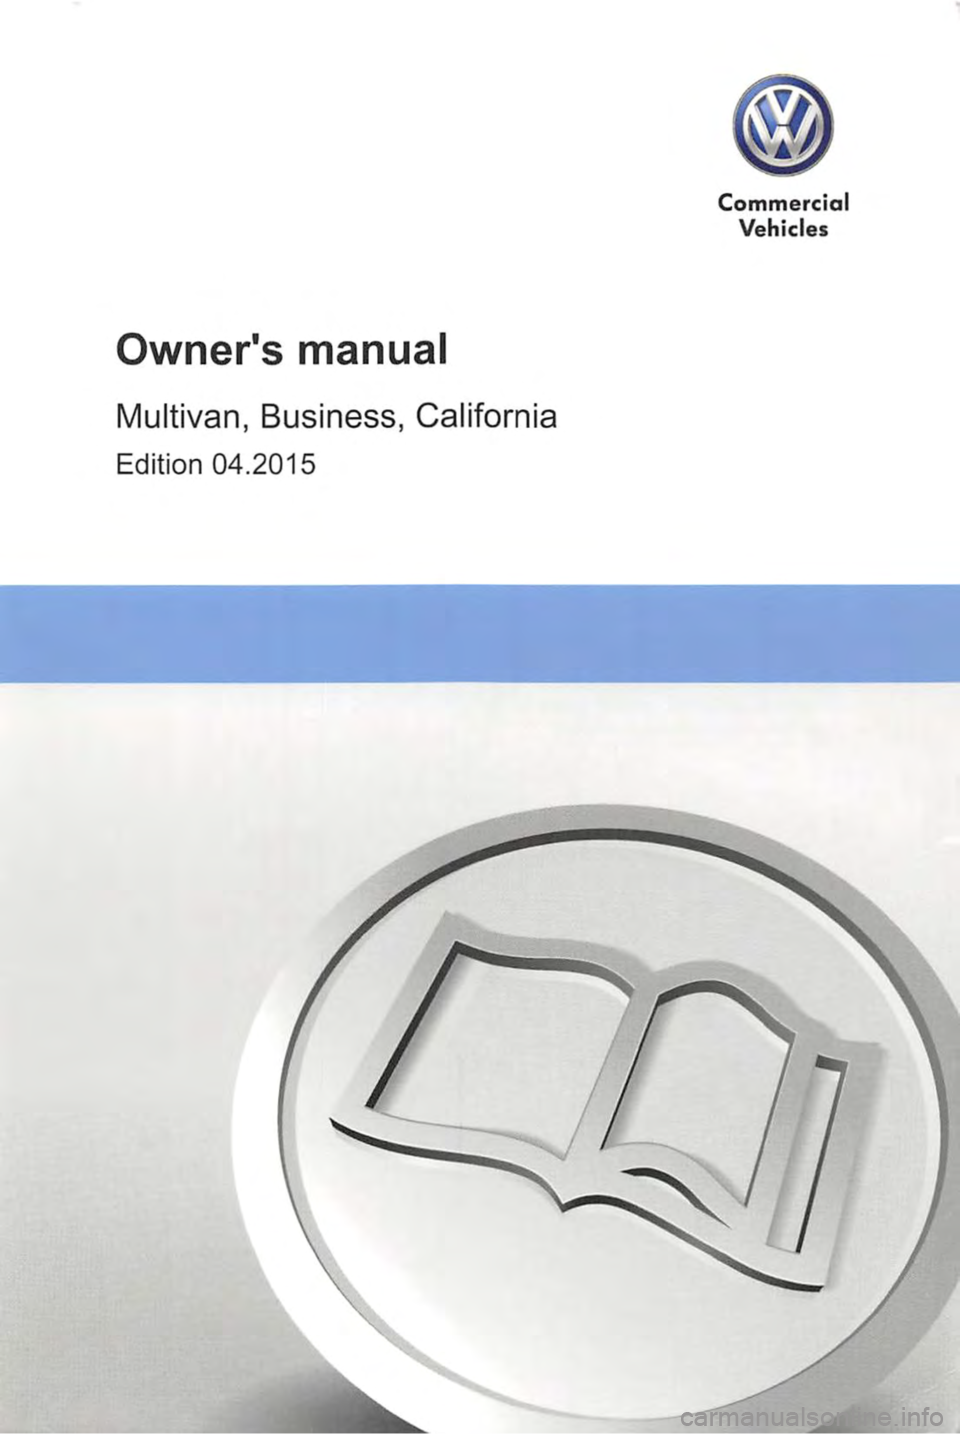 VOLKSWAGEN TRANSPORTER 2010  Owners Manual Owners manual 
Multivan, Business, California 
Edition 04.2015 
Commercial 
Vehicles  